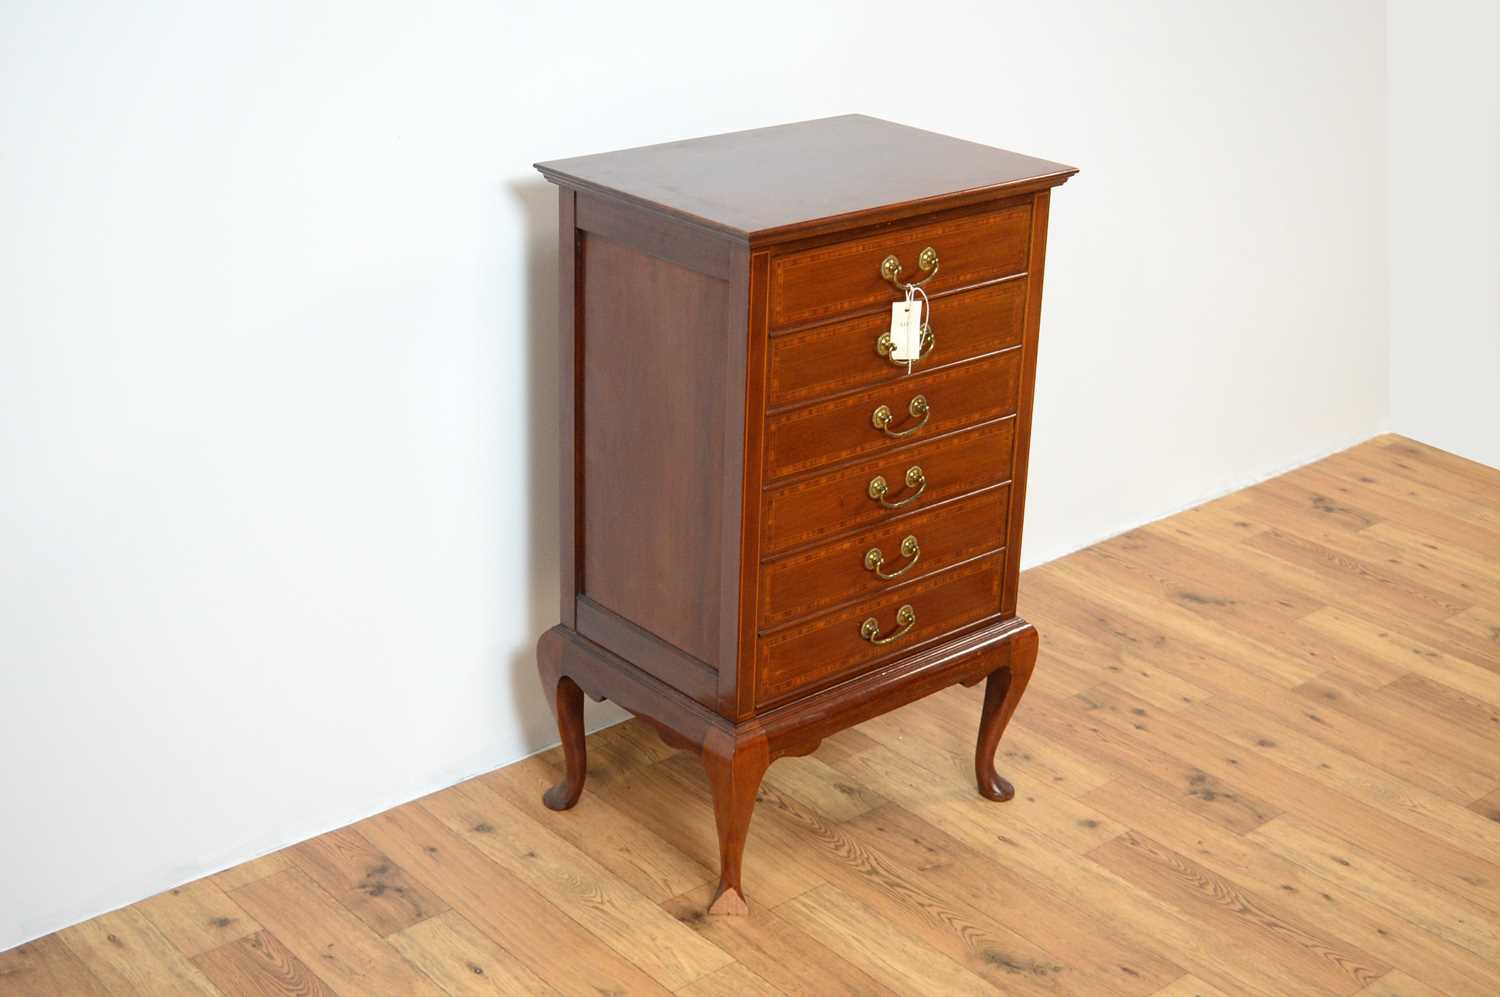 An early 20th Century inlaid mahogany music cabinet - Image 4 of 6